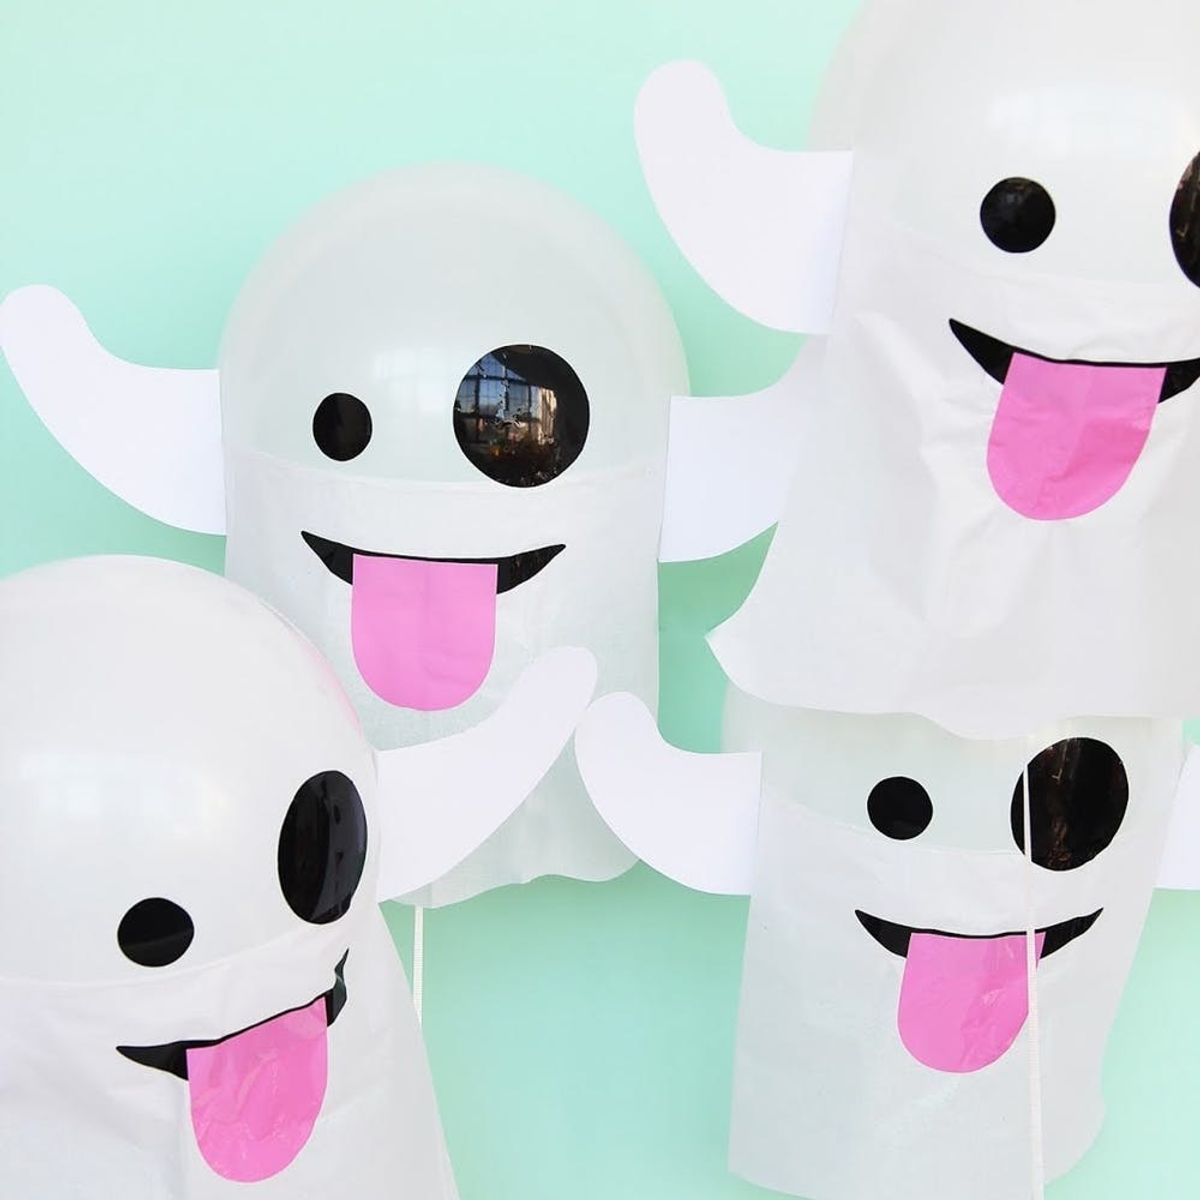 18 Halloween Office Party Ideas to Take Your Workplace to the Next Level